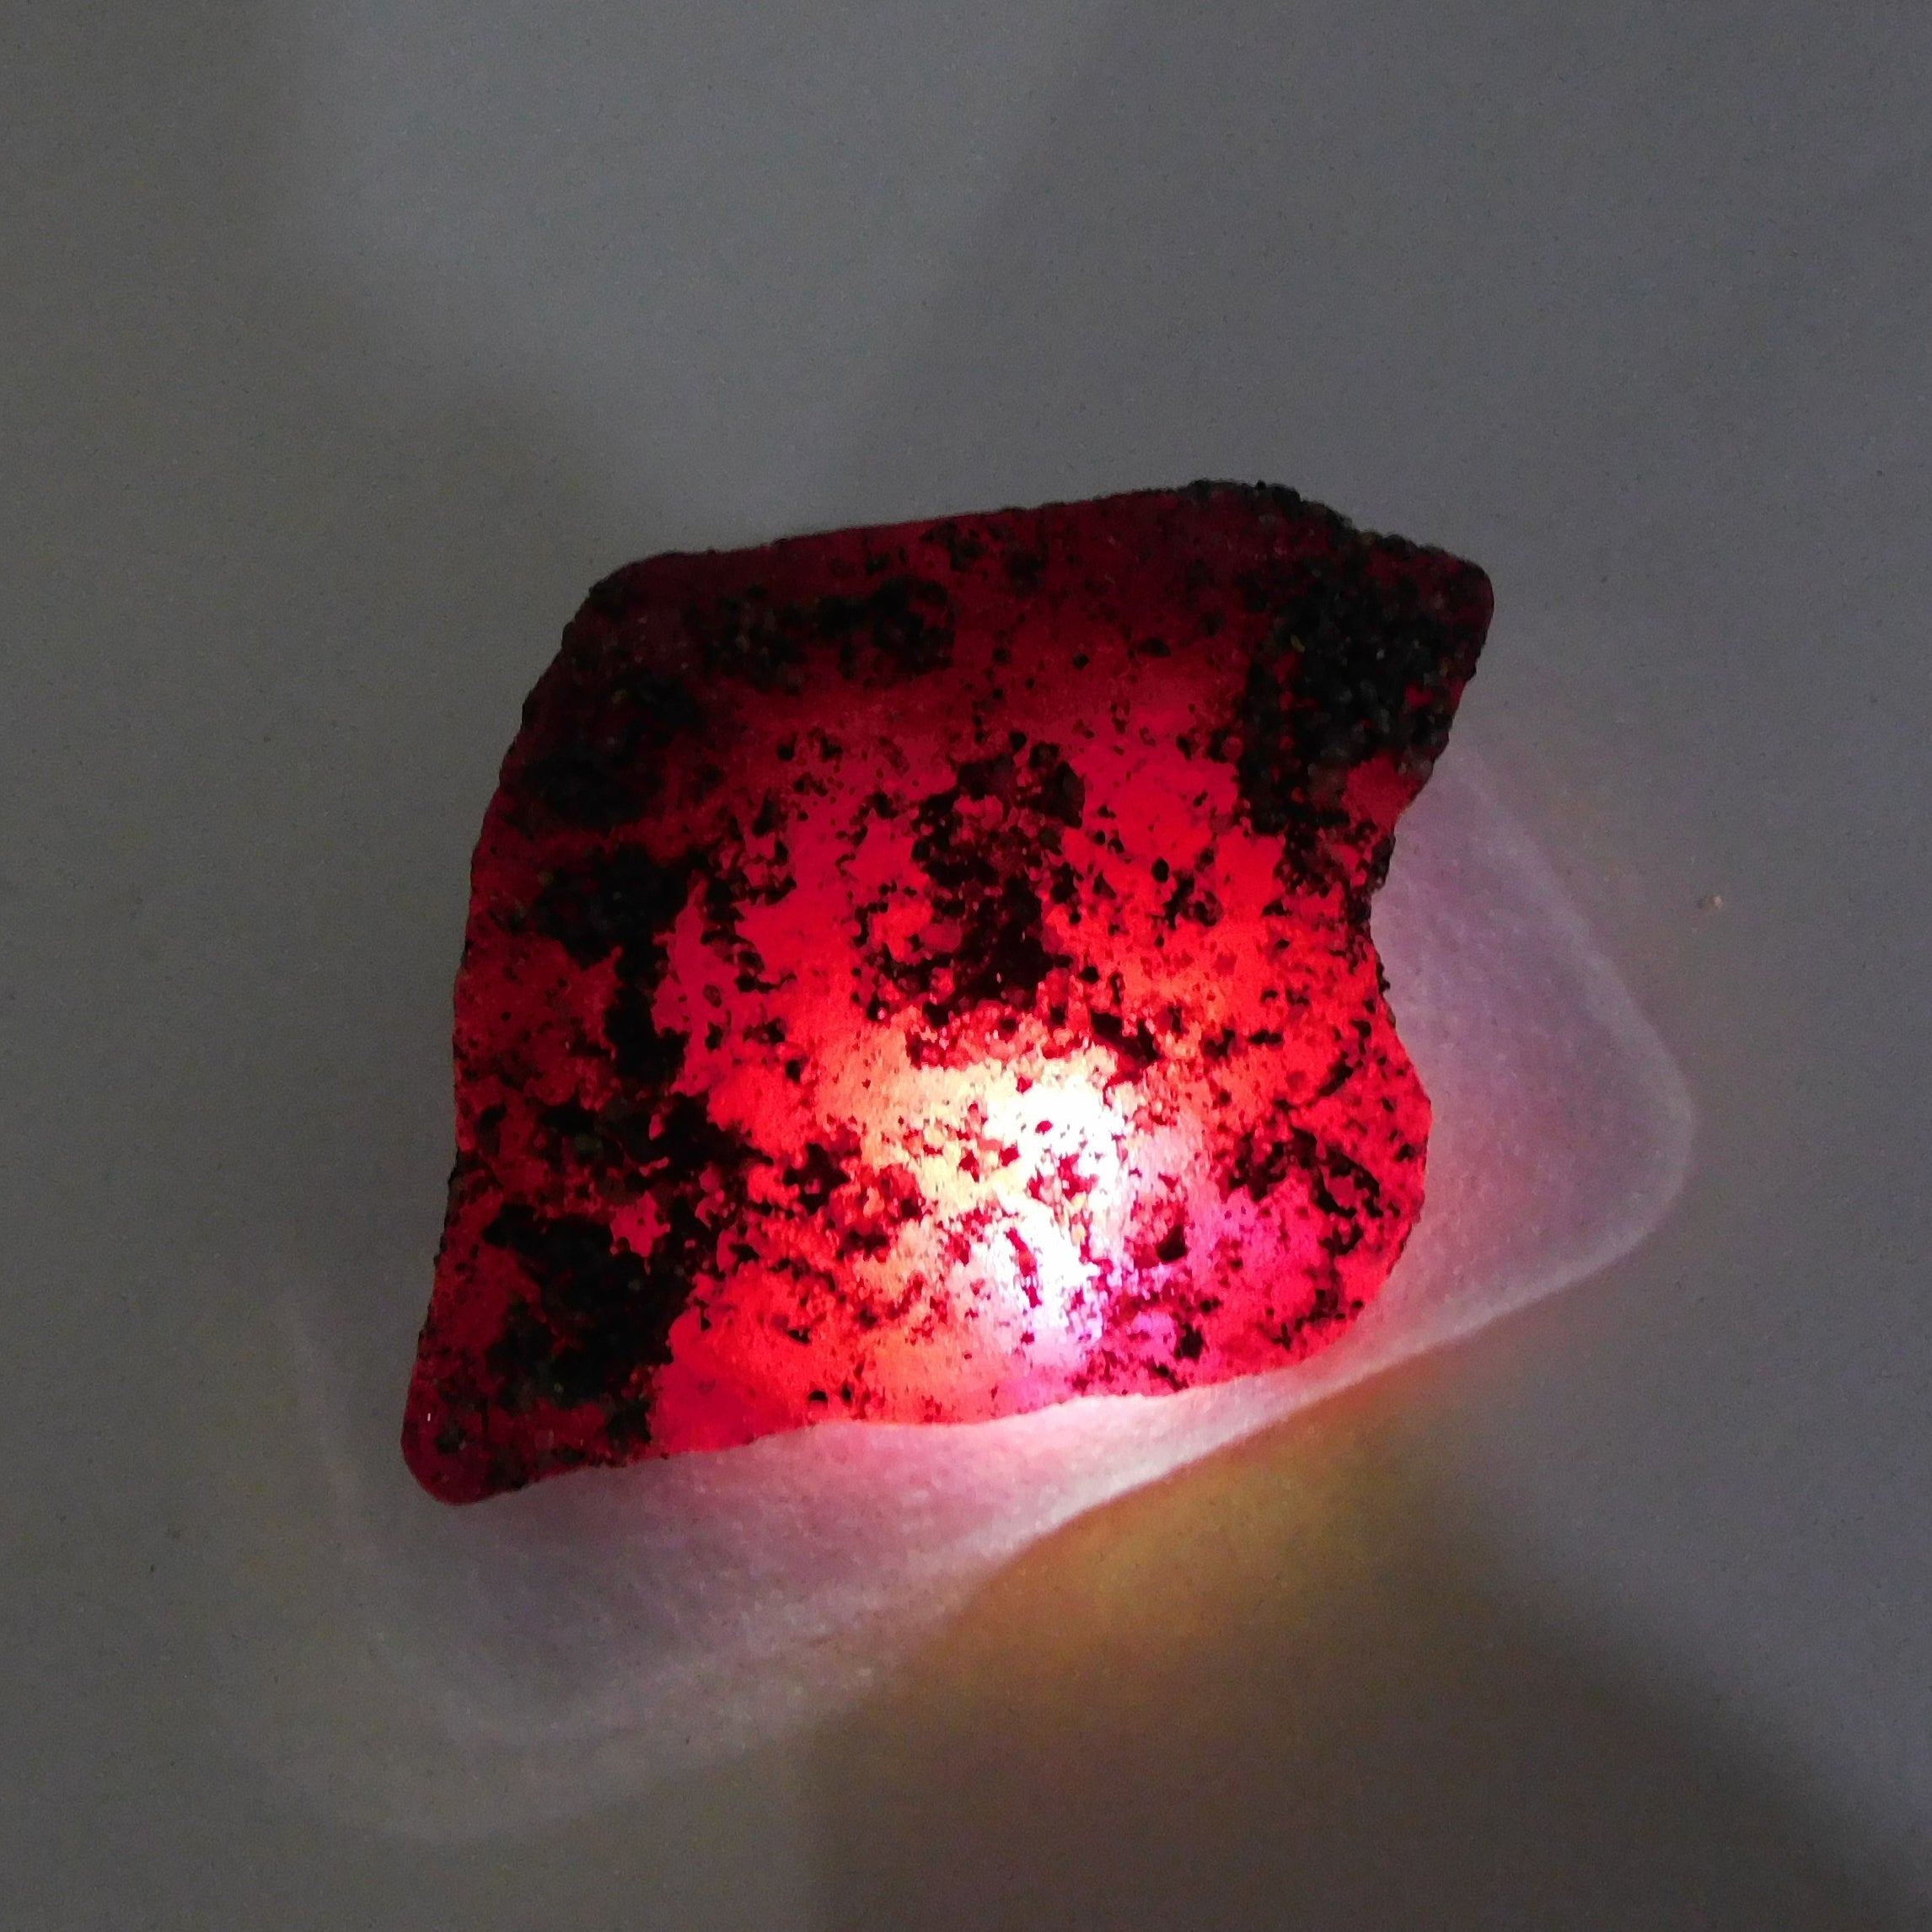 Uncut Red Rough 114.95 Carat Red Rough Certified Natural Loose Gemstone | "RED ROUGH" Ethical Sourcing | Best Offer